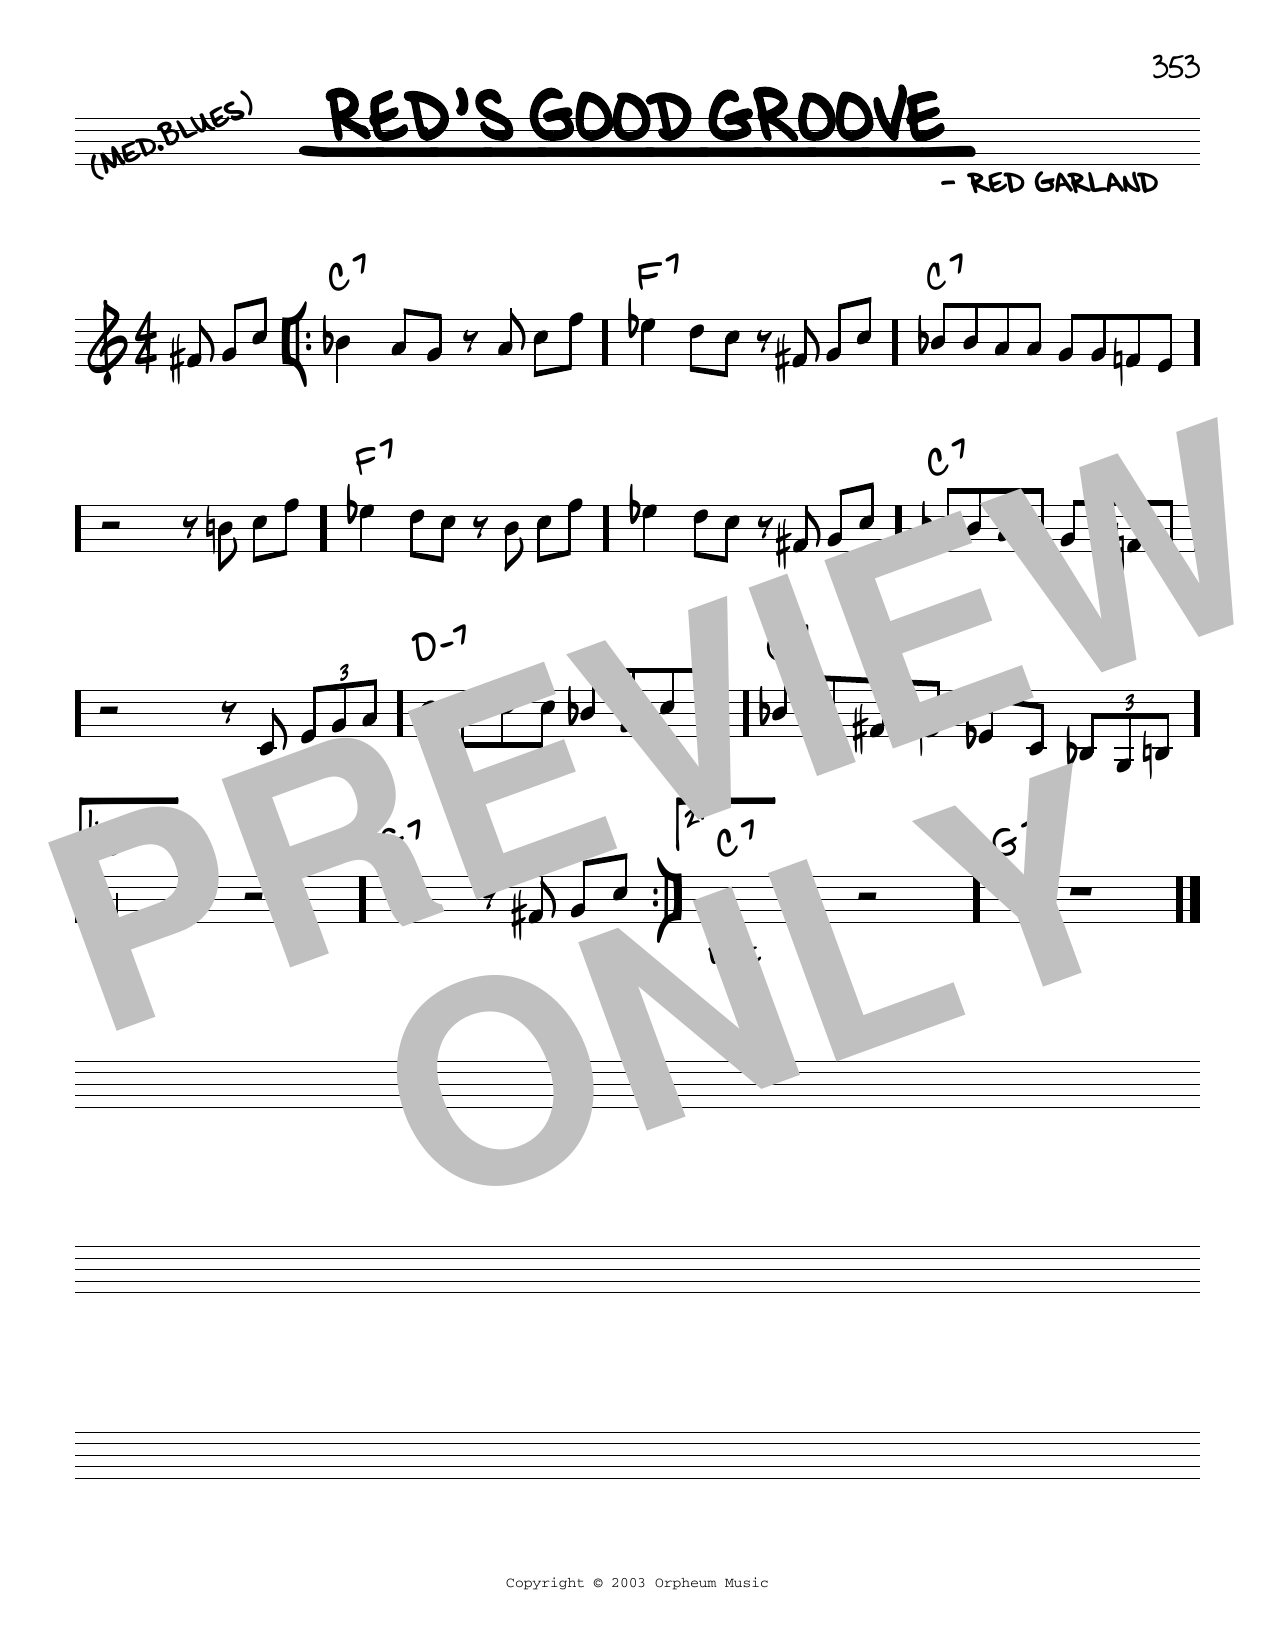 Download Red Garland Red's Good Groove Sheet Music